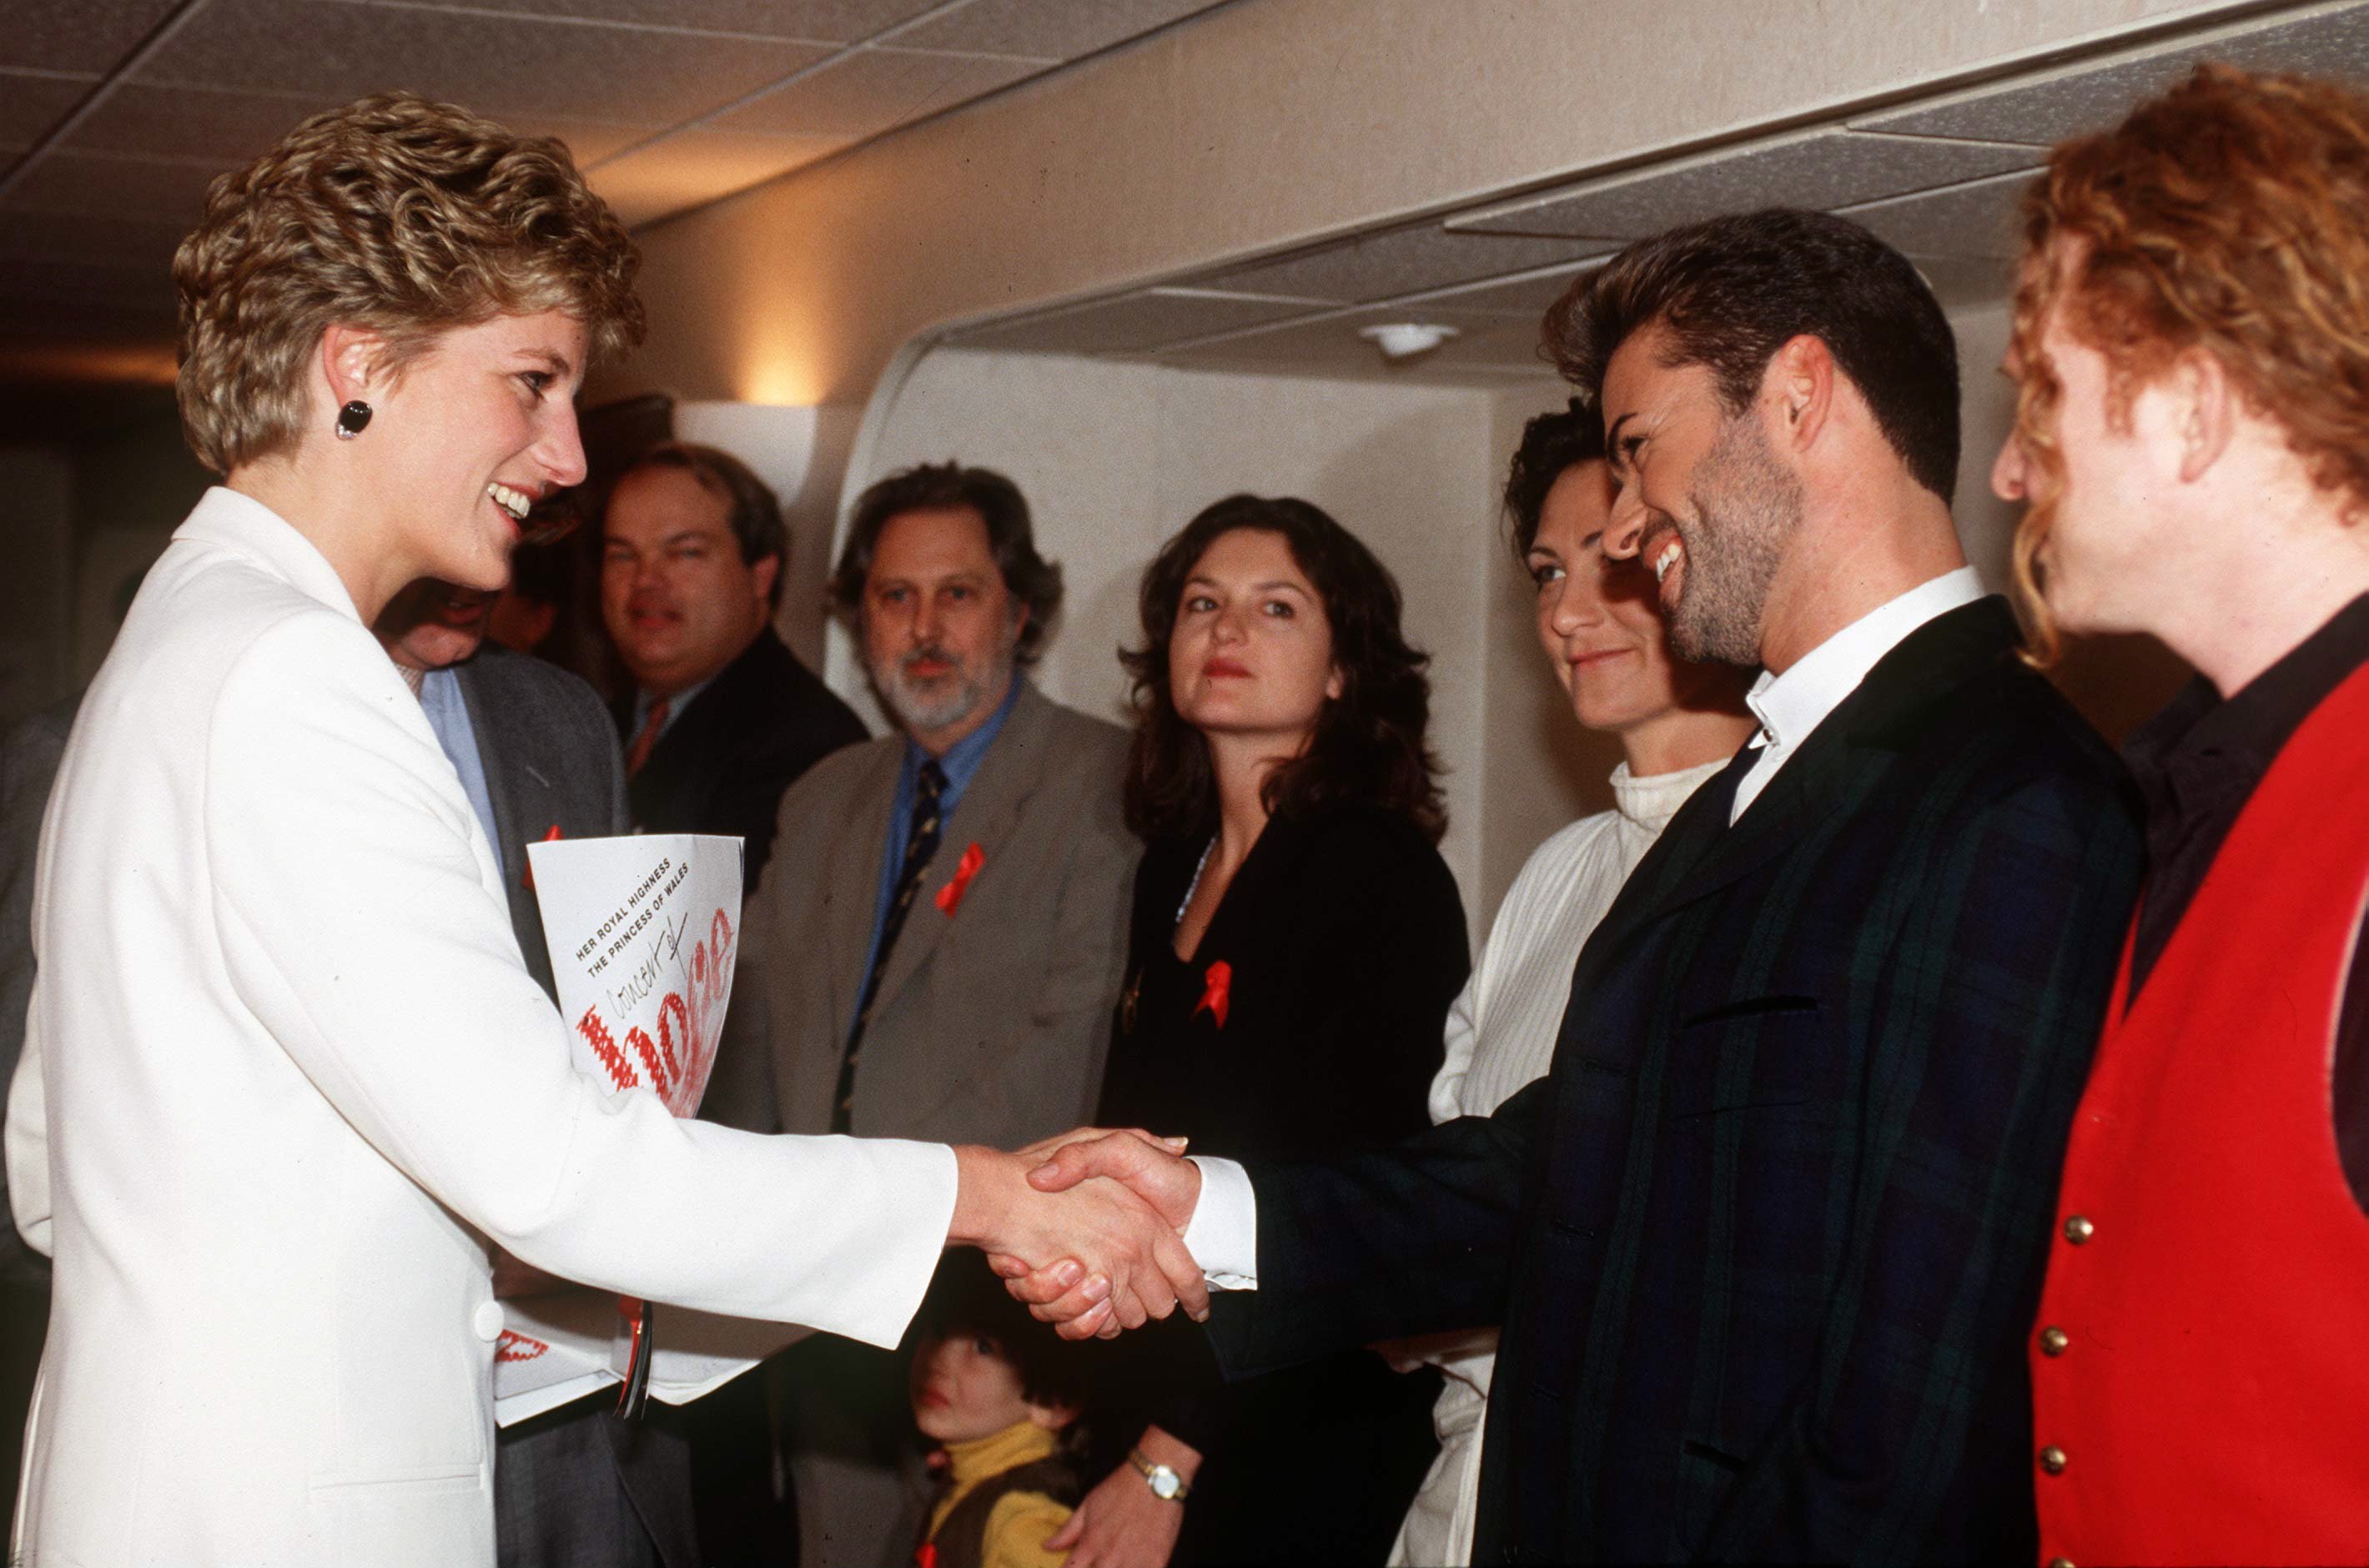 Diana, Princess of Wales meets singer George Michael at Wembley Arena in London, for the Concert of Hope, a benefit concert on World AIDS Day, 2nd December 1993 | Source: Getty Images